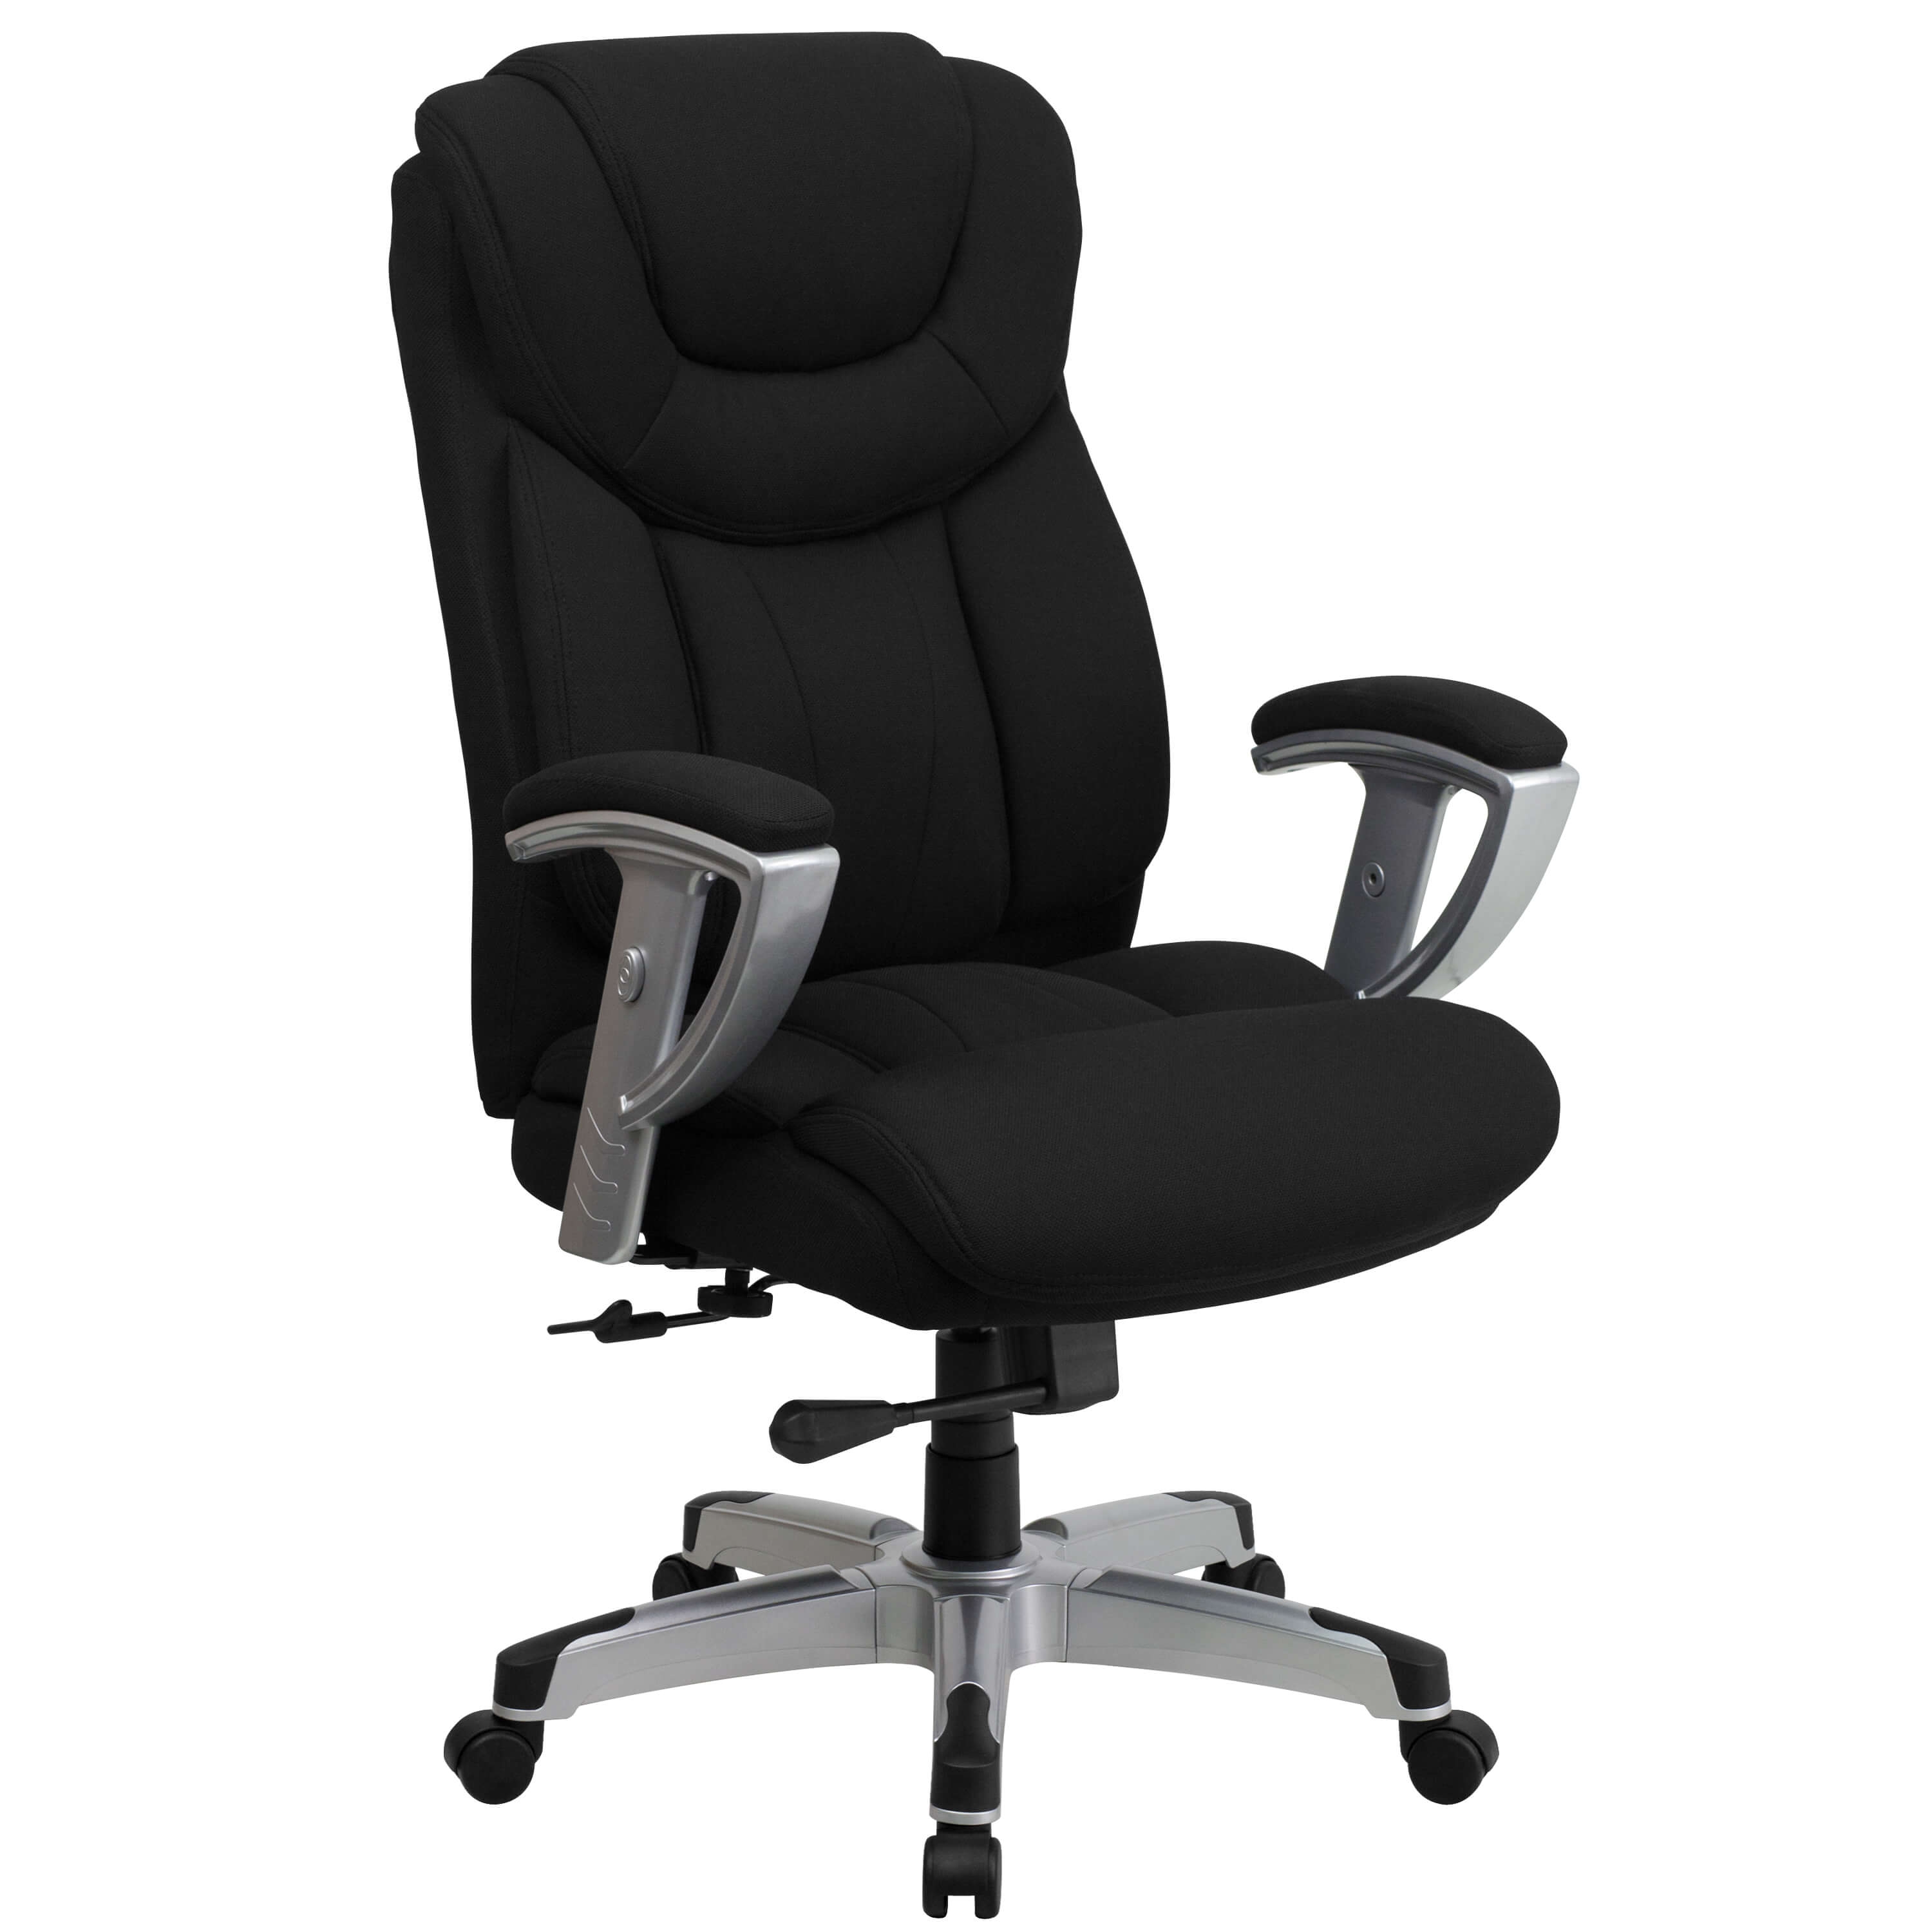 big-and-tall-office-chairs-office-chairs-with-high-weight-capacity.jpg